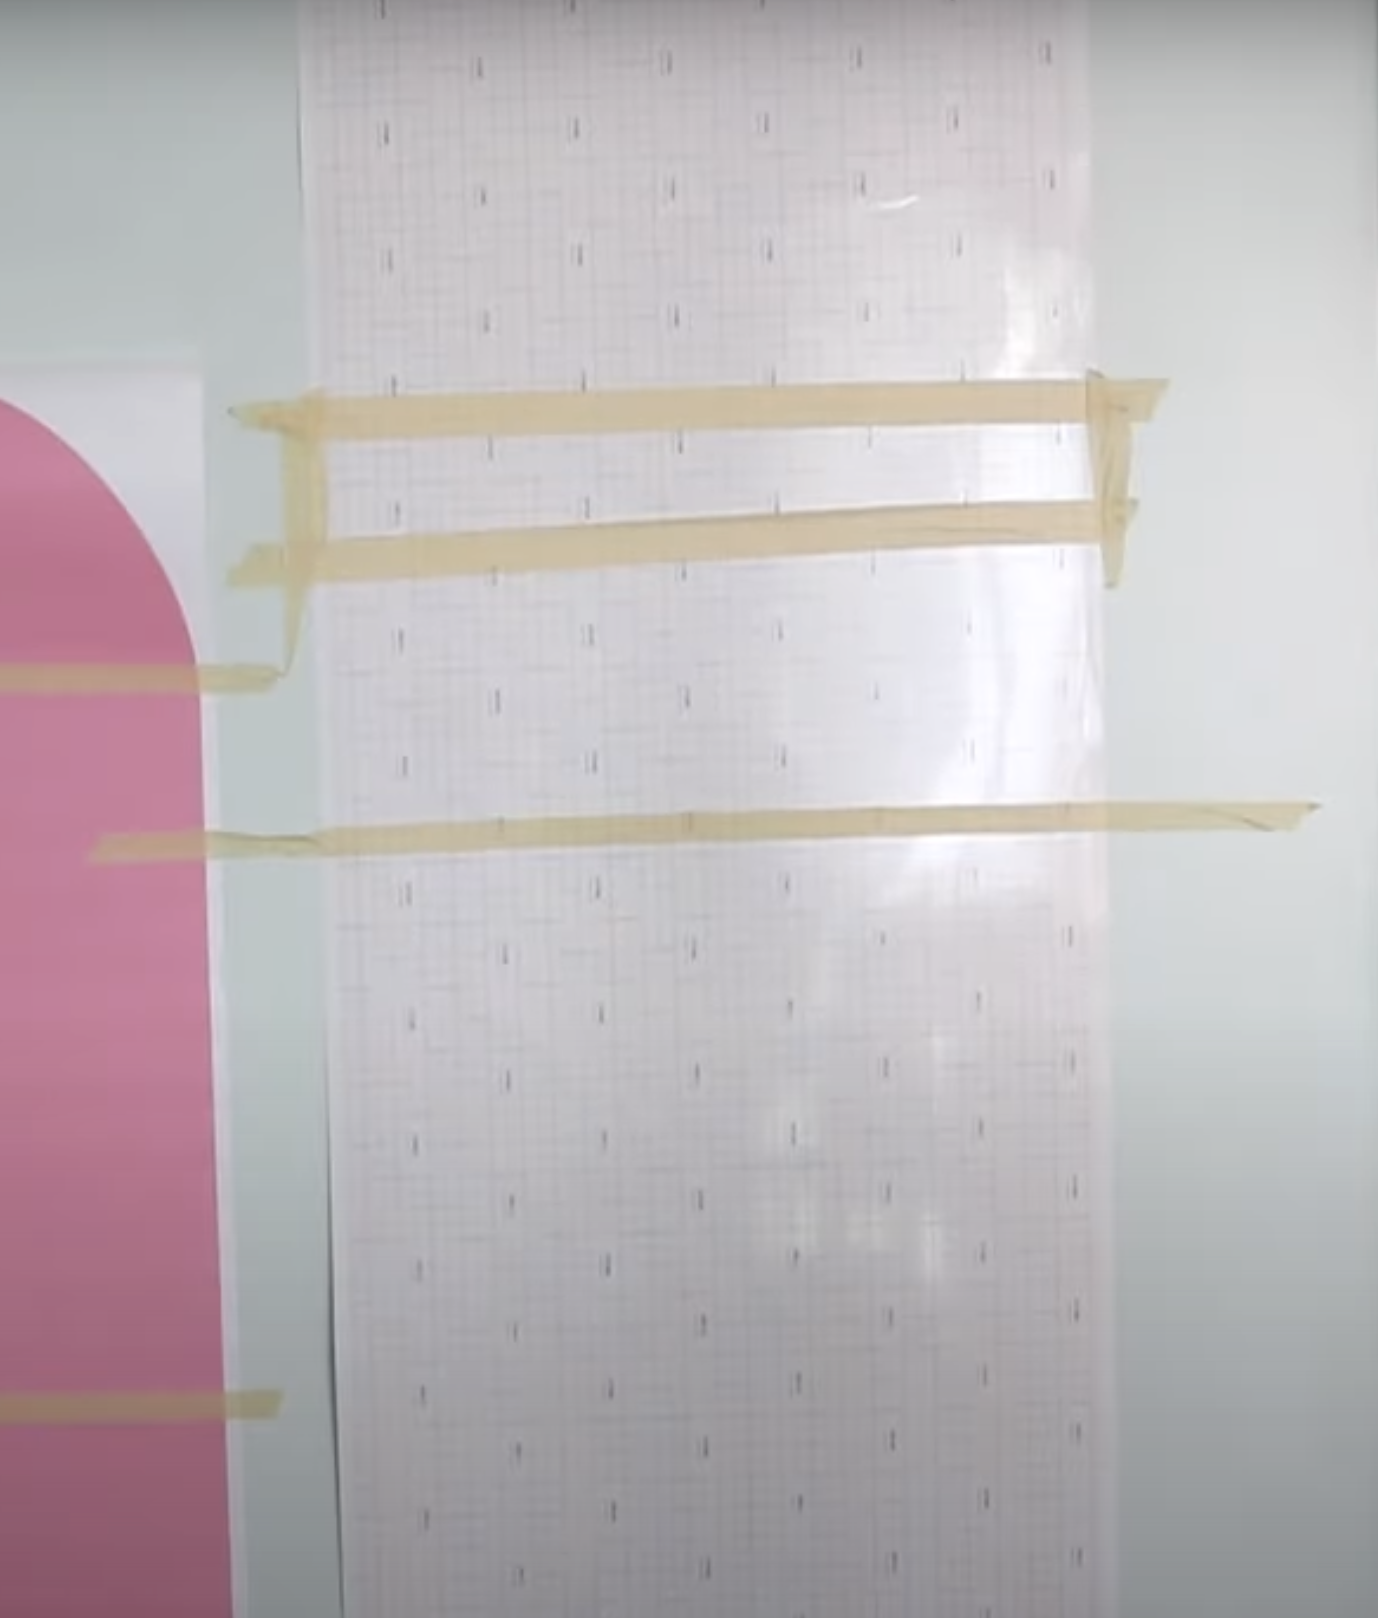 Use painter's tape to hold decal on wall.